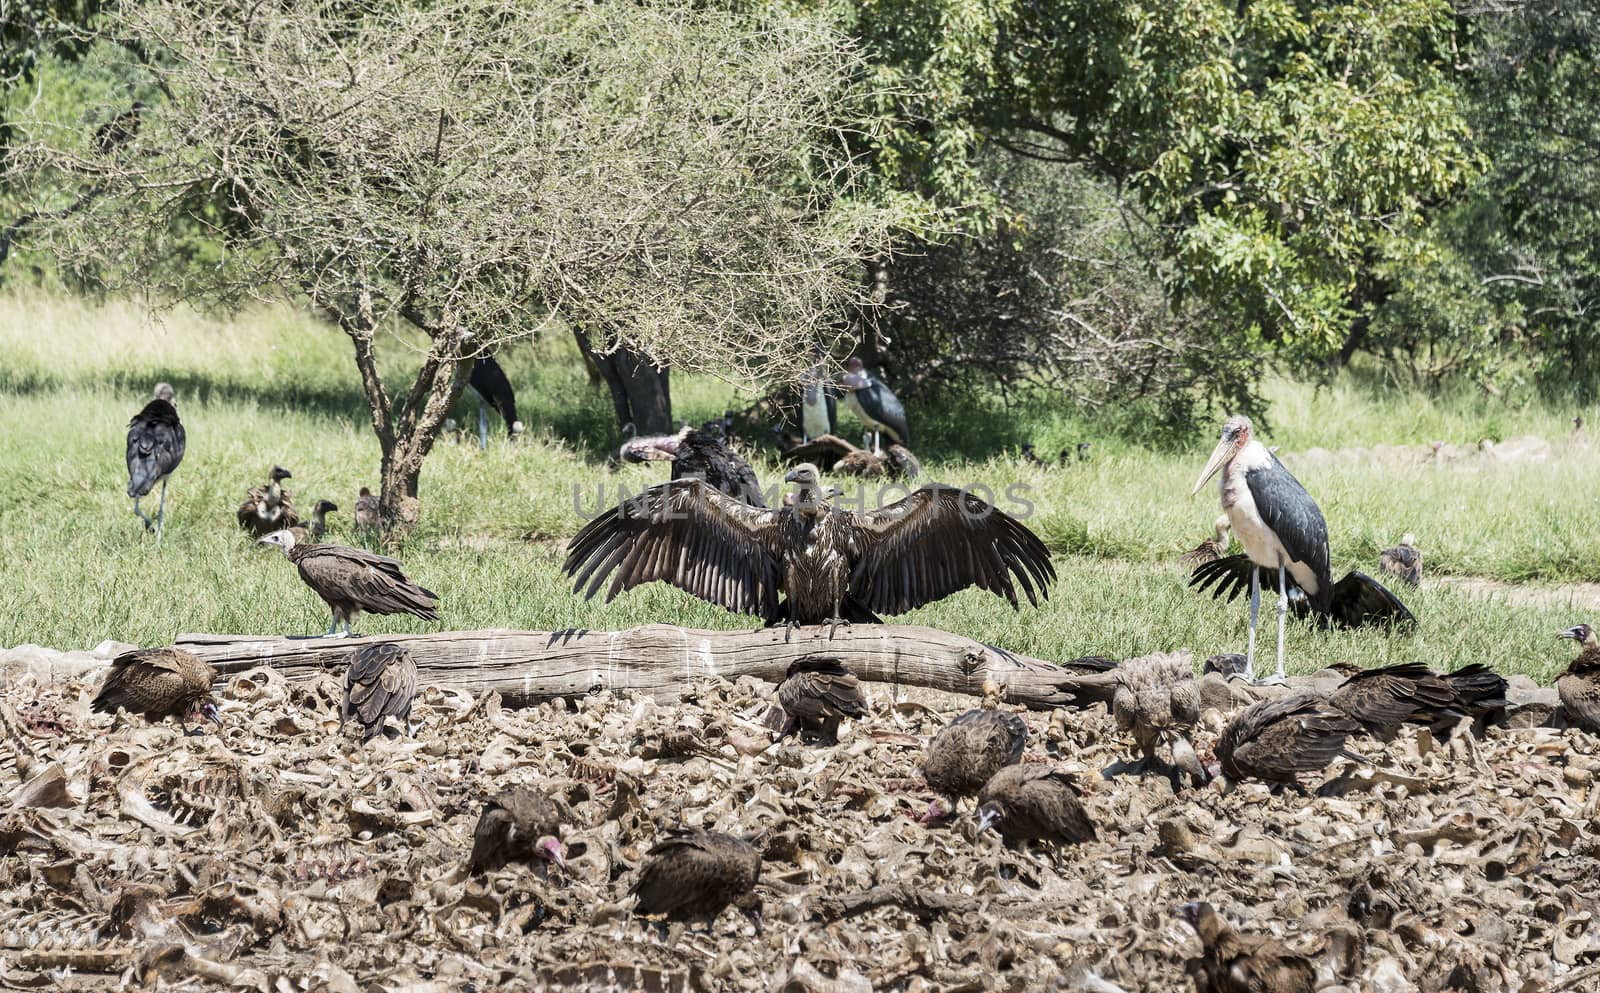 vulture and marabou eating from dead animals by compuinfoto